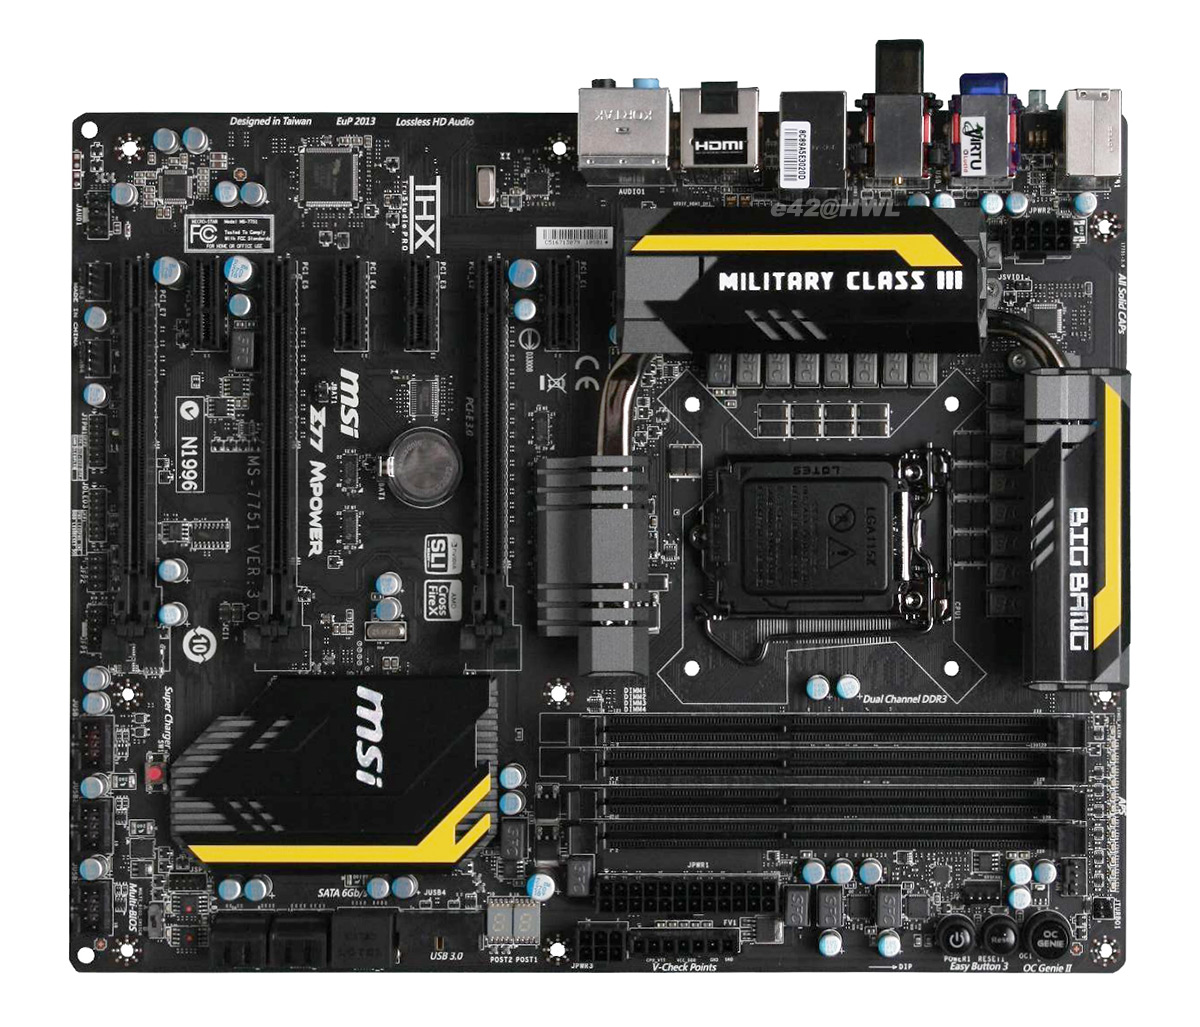 MSI Z77A-GD65 - Intel Z77 Panther Point Chipset and Motherboard Preview - ASRock, ASUS, Gigabyte 